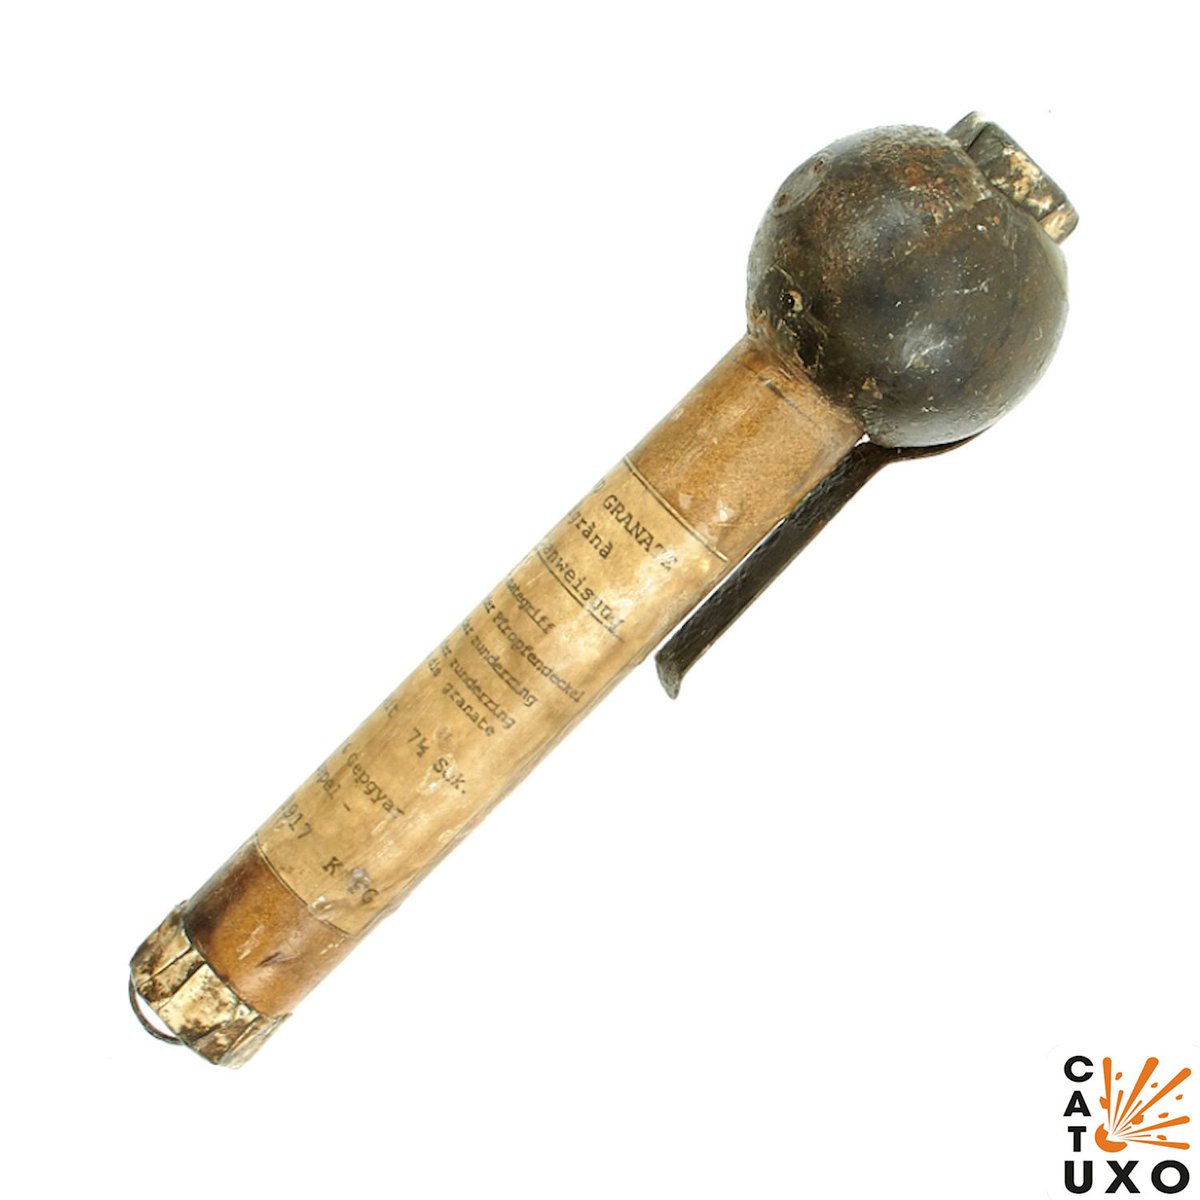 I can't get over the fact that the WWI Austro-Hungarian grenade looks like a fucking crack pipe.